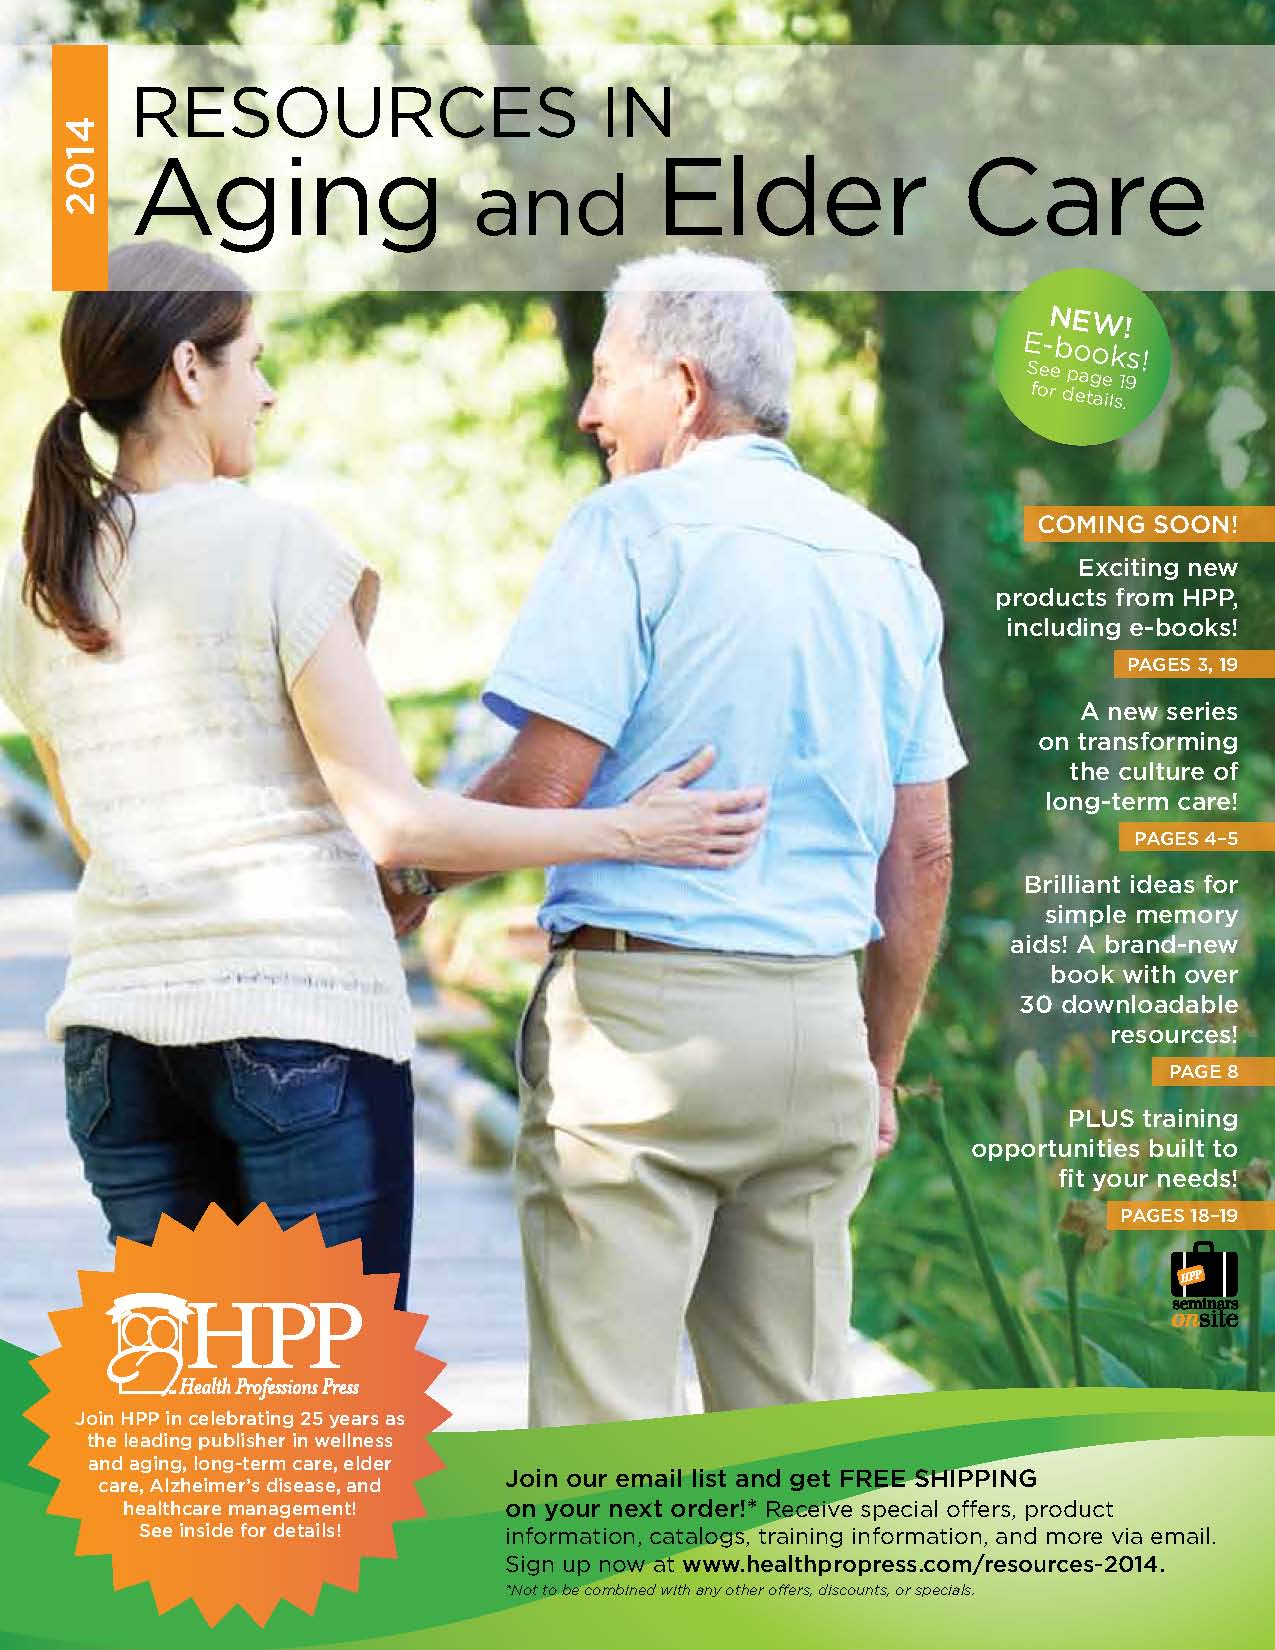 Resources in Aging and Elder Care 2014